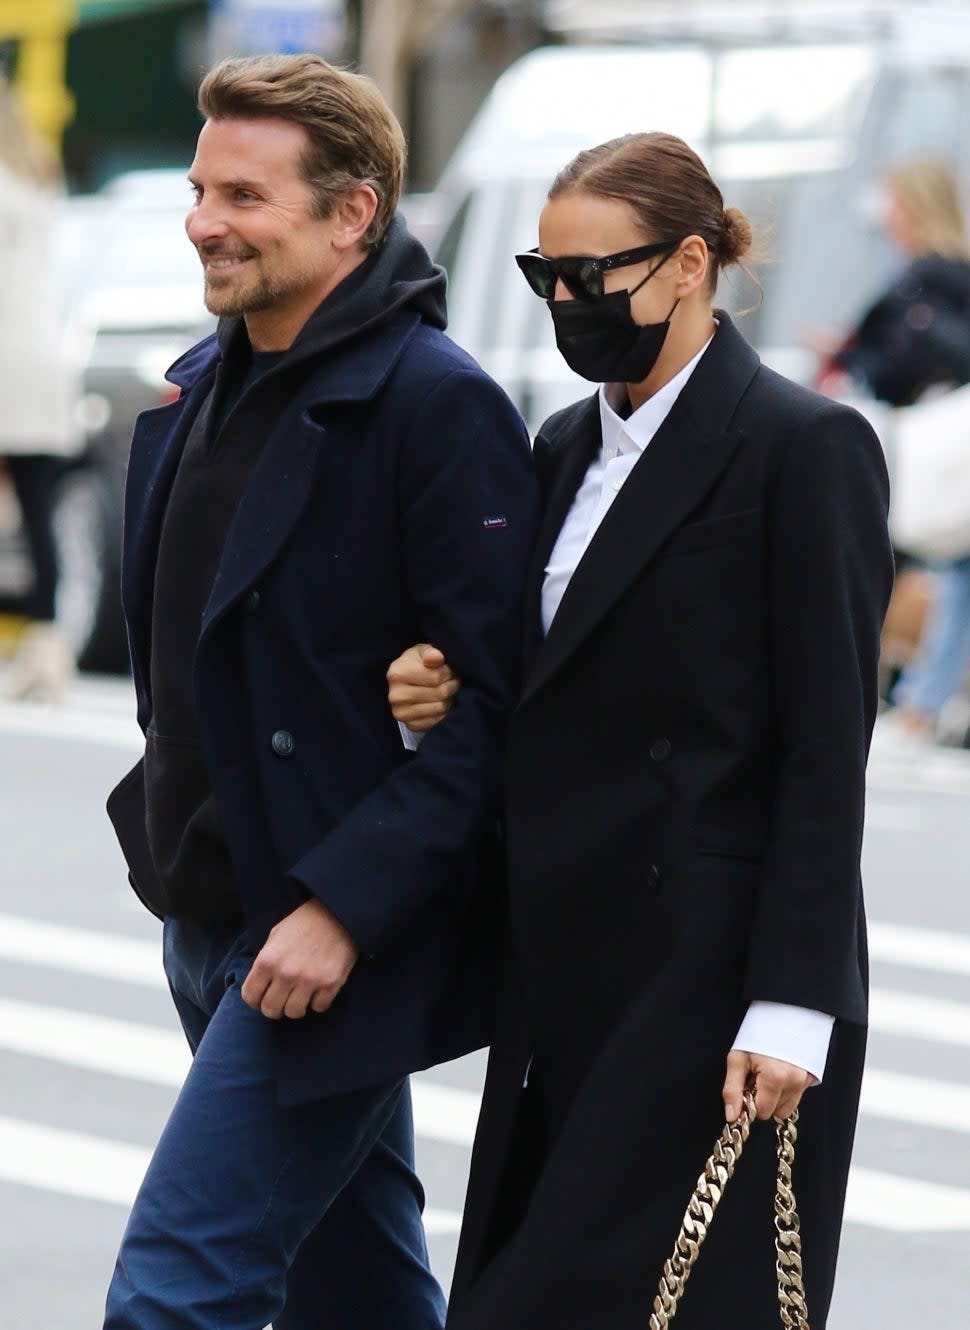 Bradley Cooper and Irina Shayk are all smiles walking arm-in-arm during a windy and chilly afternoon around Manhattan’s West Village area.